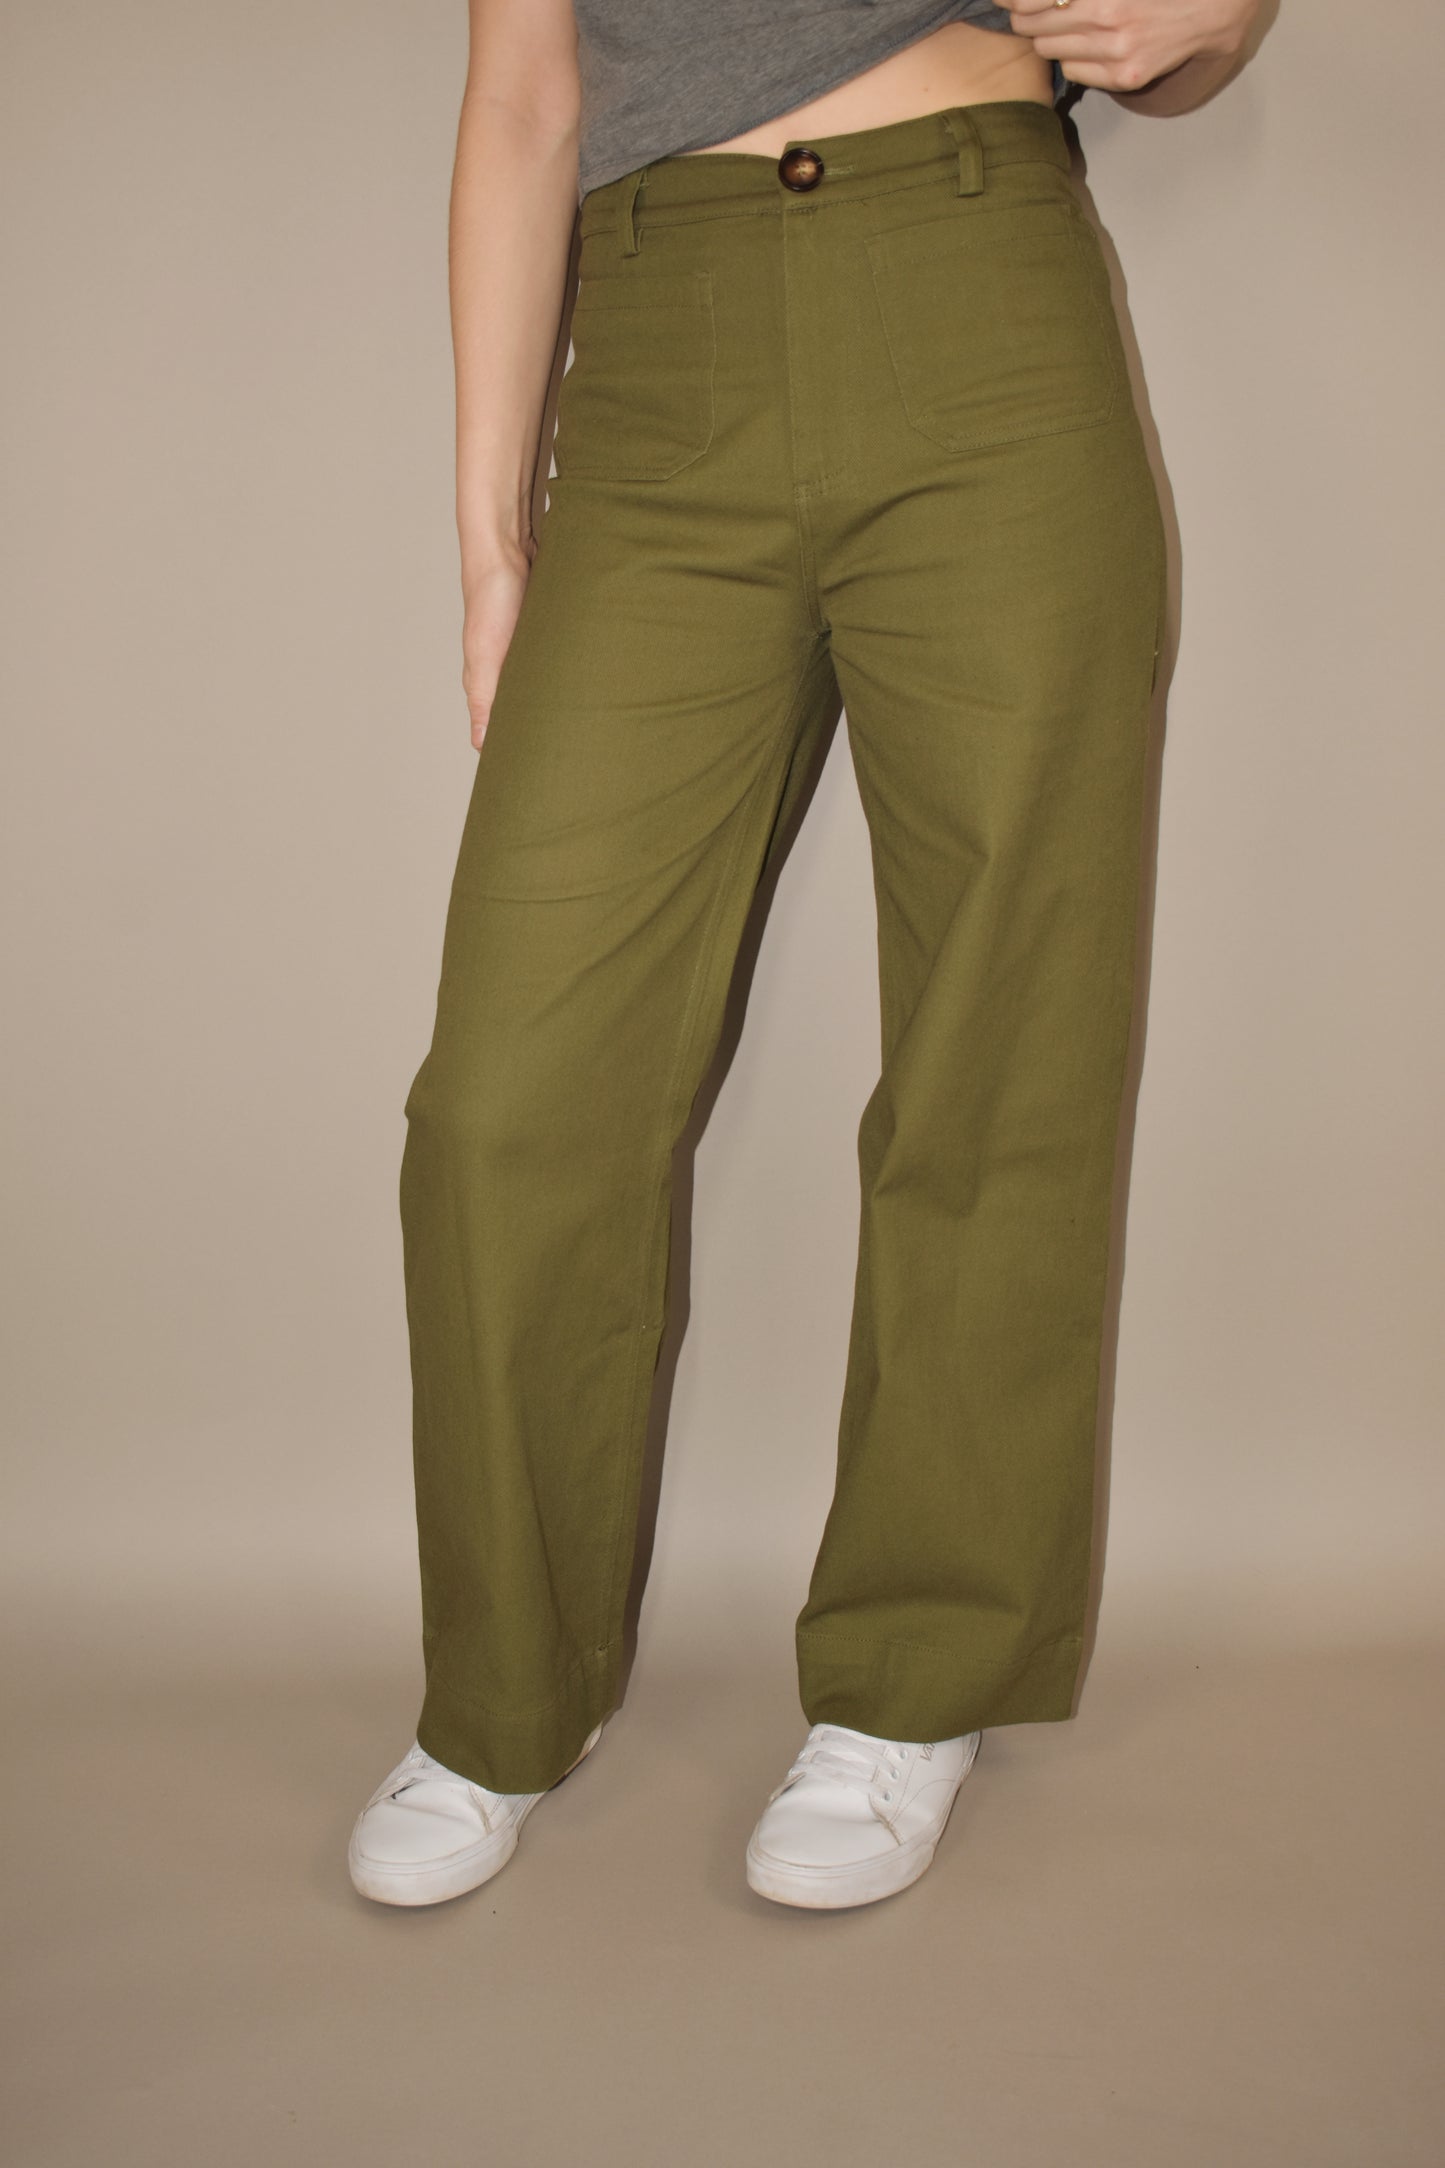 wide leg full length stretchy olive denim pants with brown front button. retro patch pockets on front and has back pockets too. no holes. high waisted.